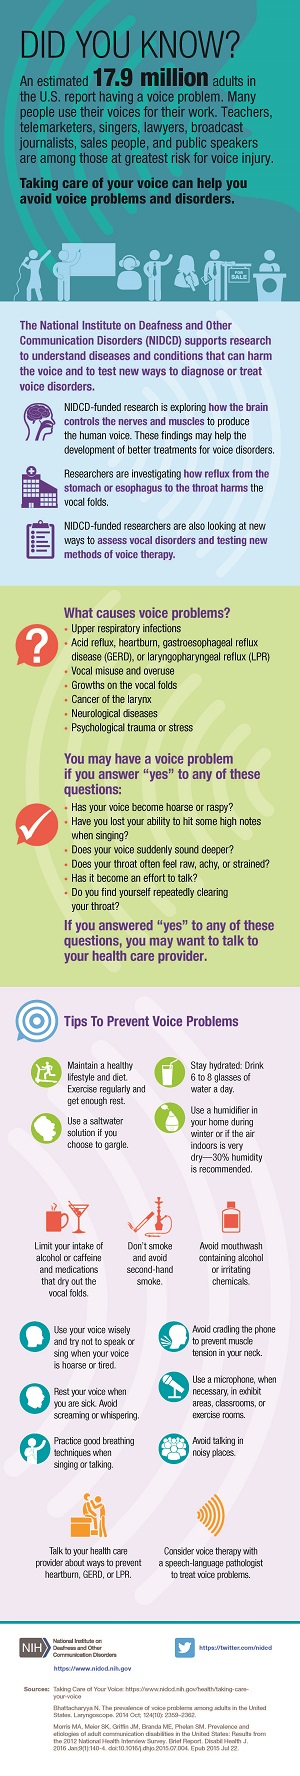 An infographic summarizing information and statistics about voice problems in U.S. adults.